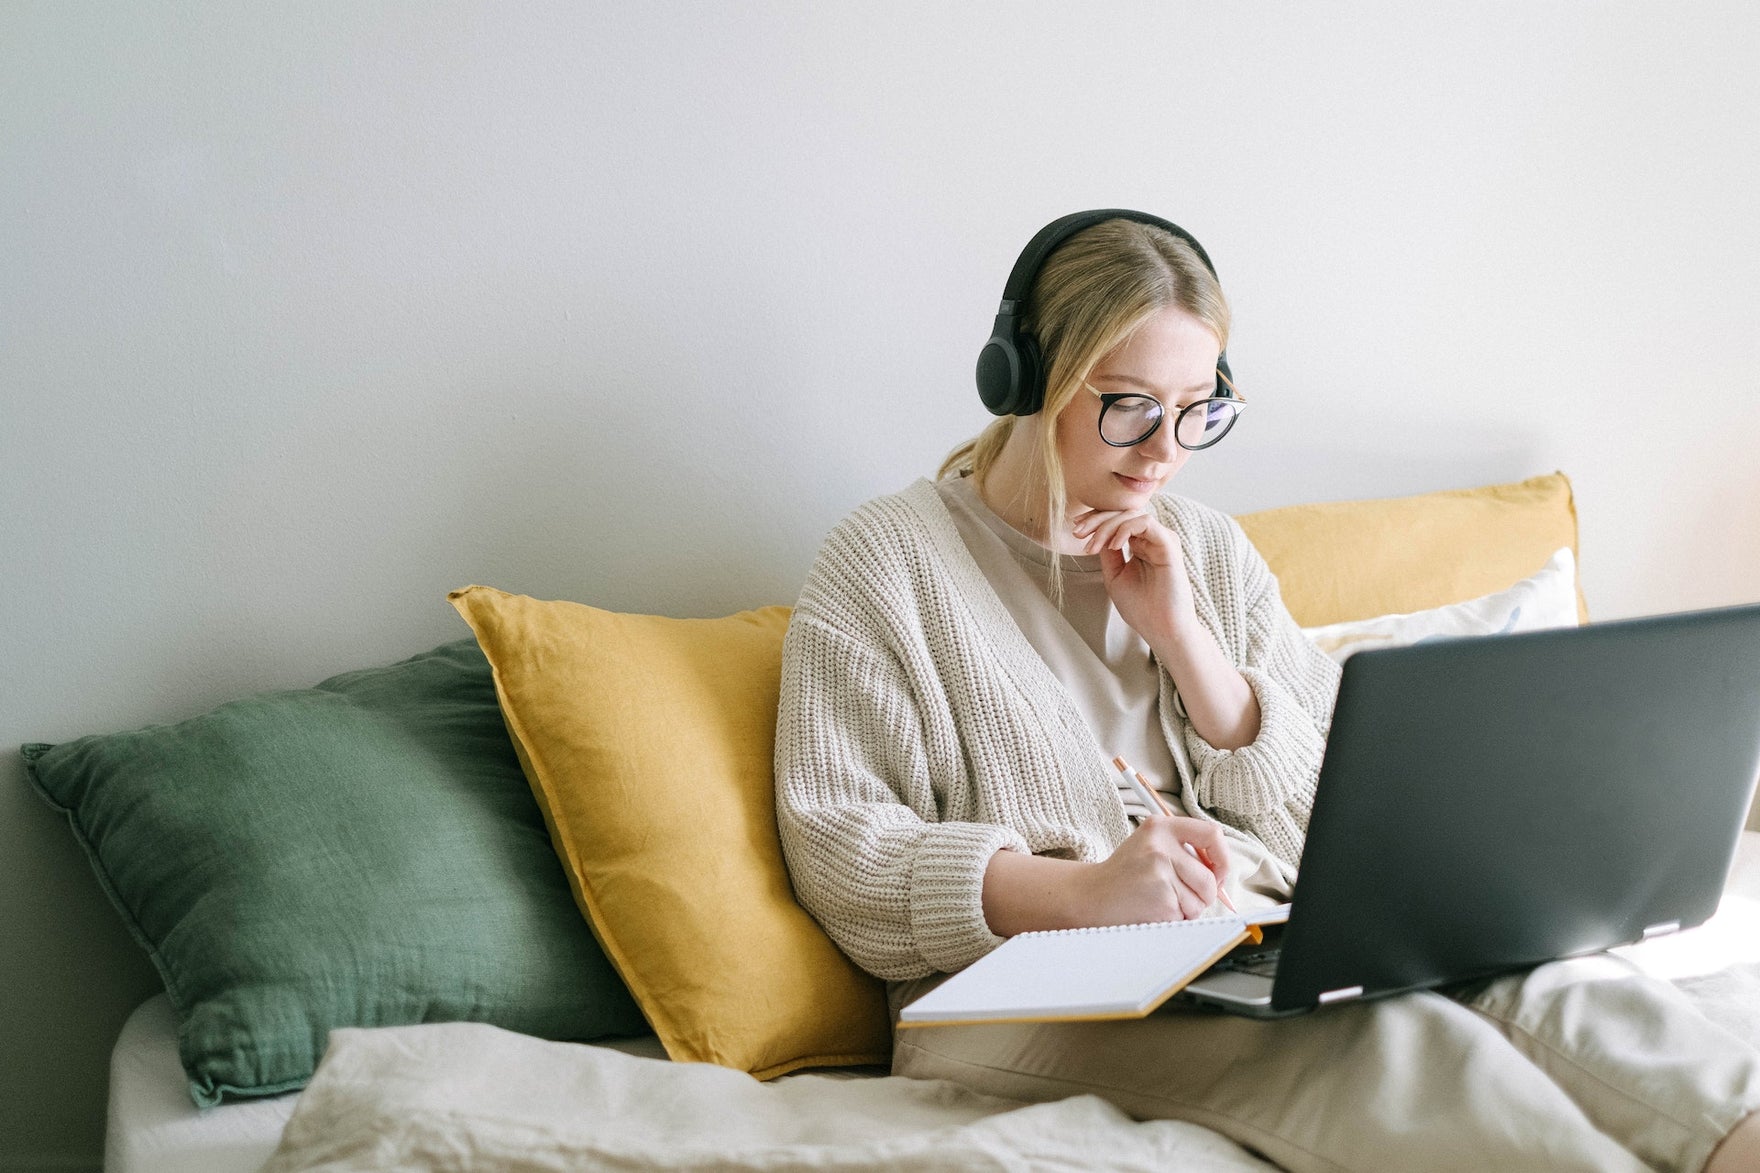 A blond woman sits on a couch working on a laptop and wearing headphones